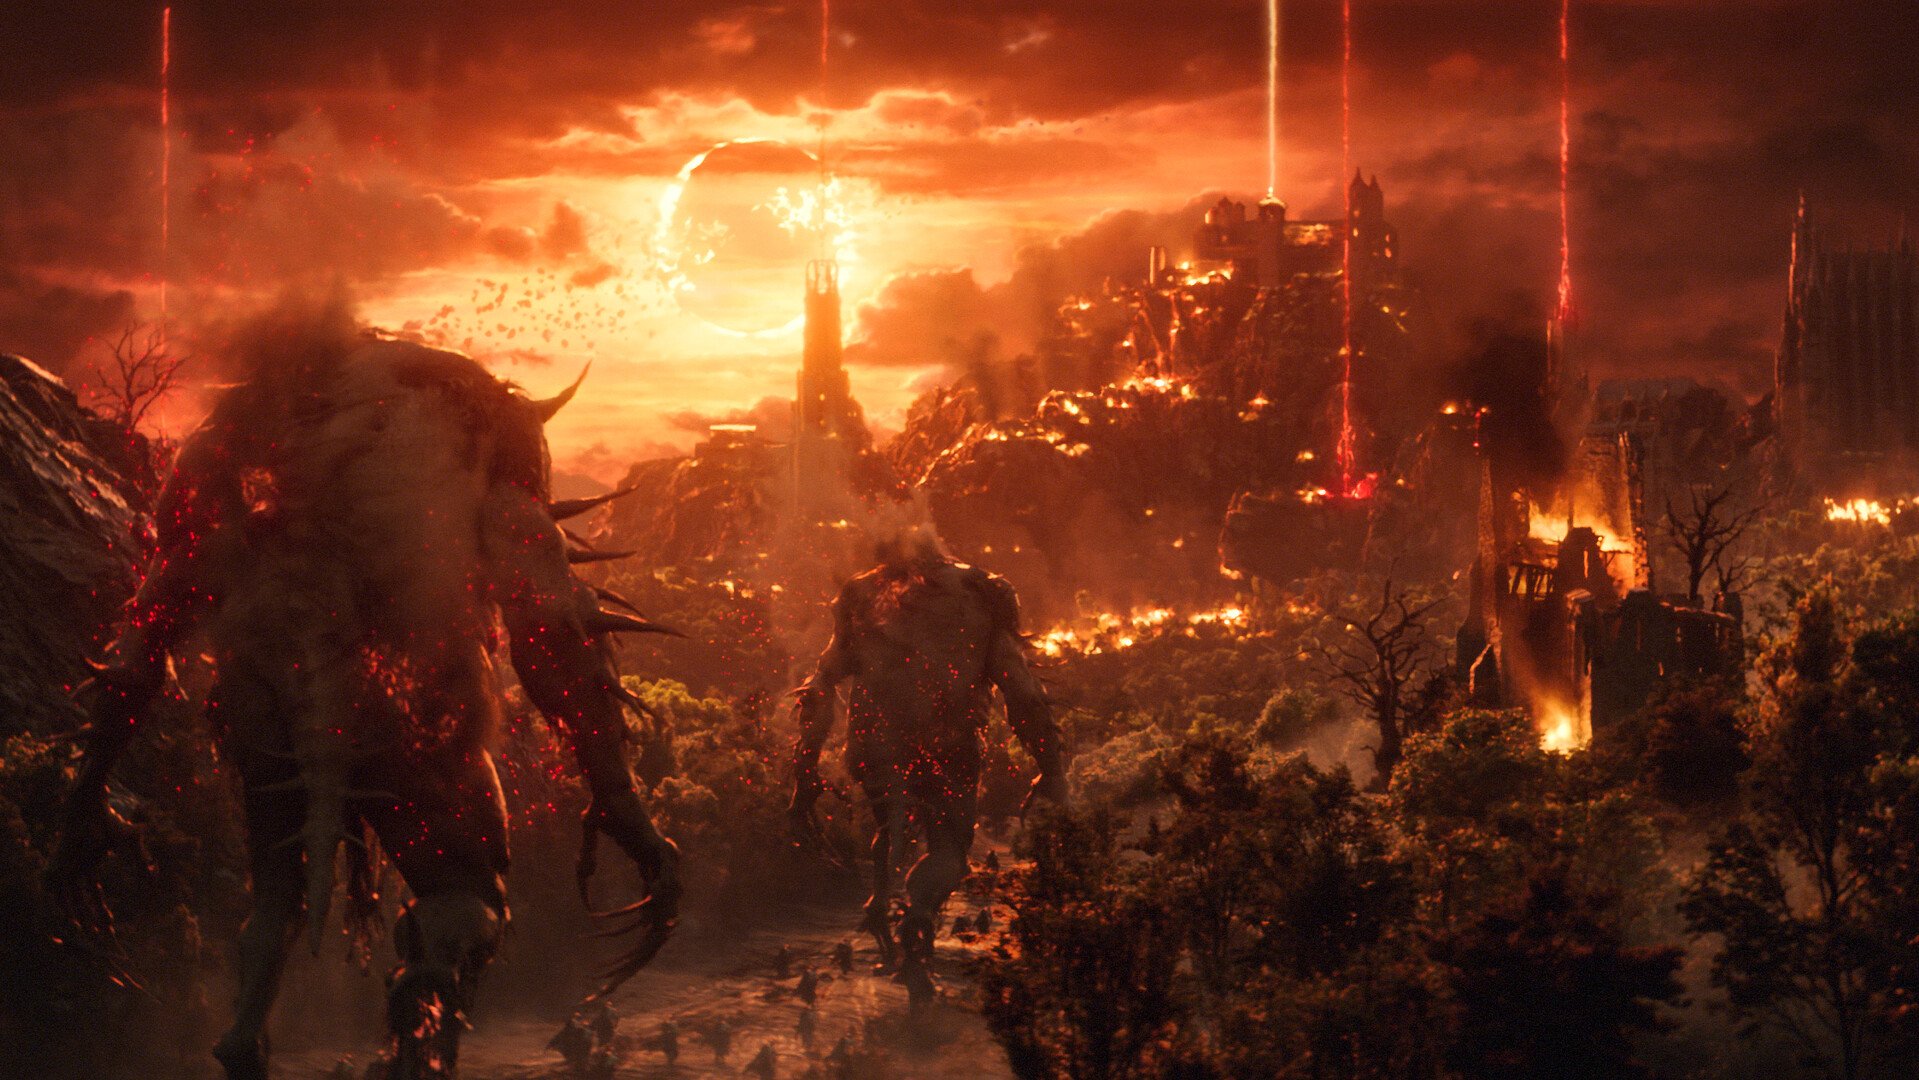 Lords of the Fallen Review Roundup: Here's What Critics Think